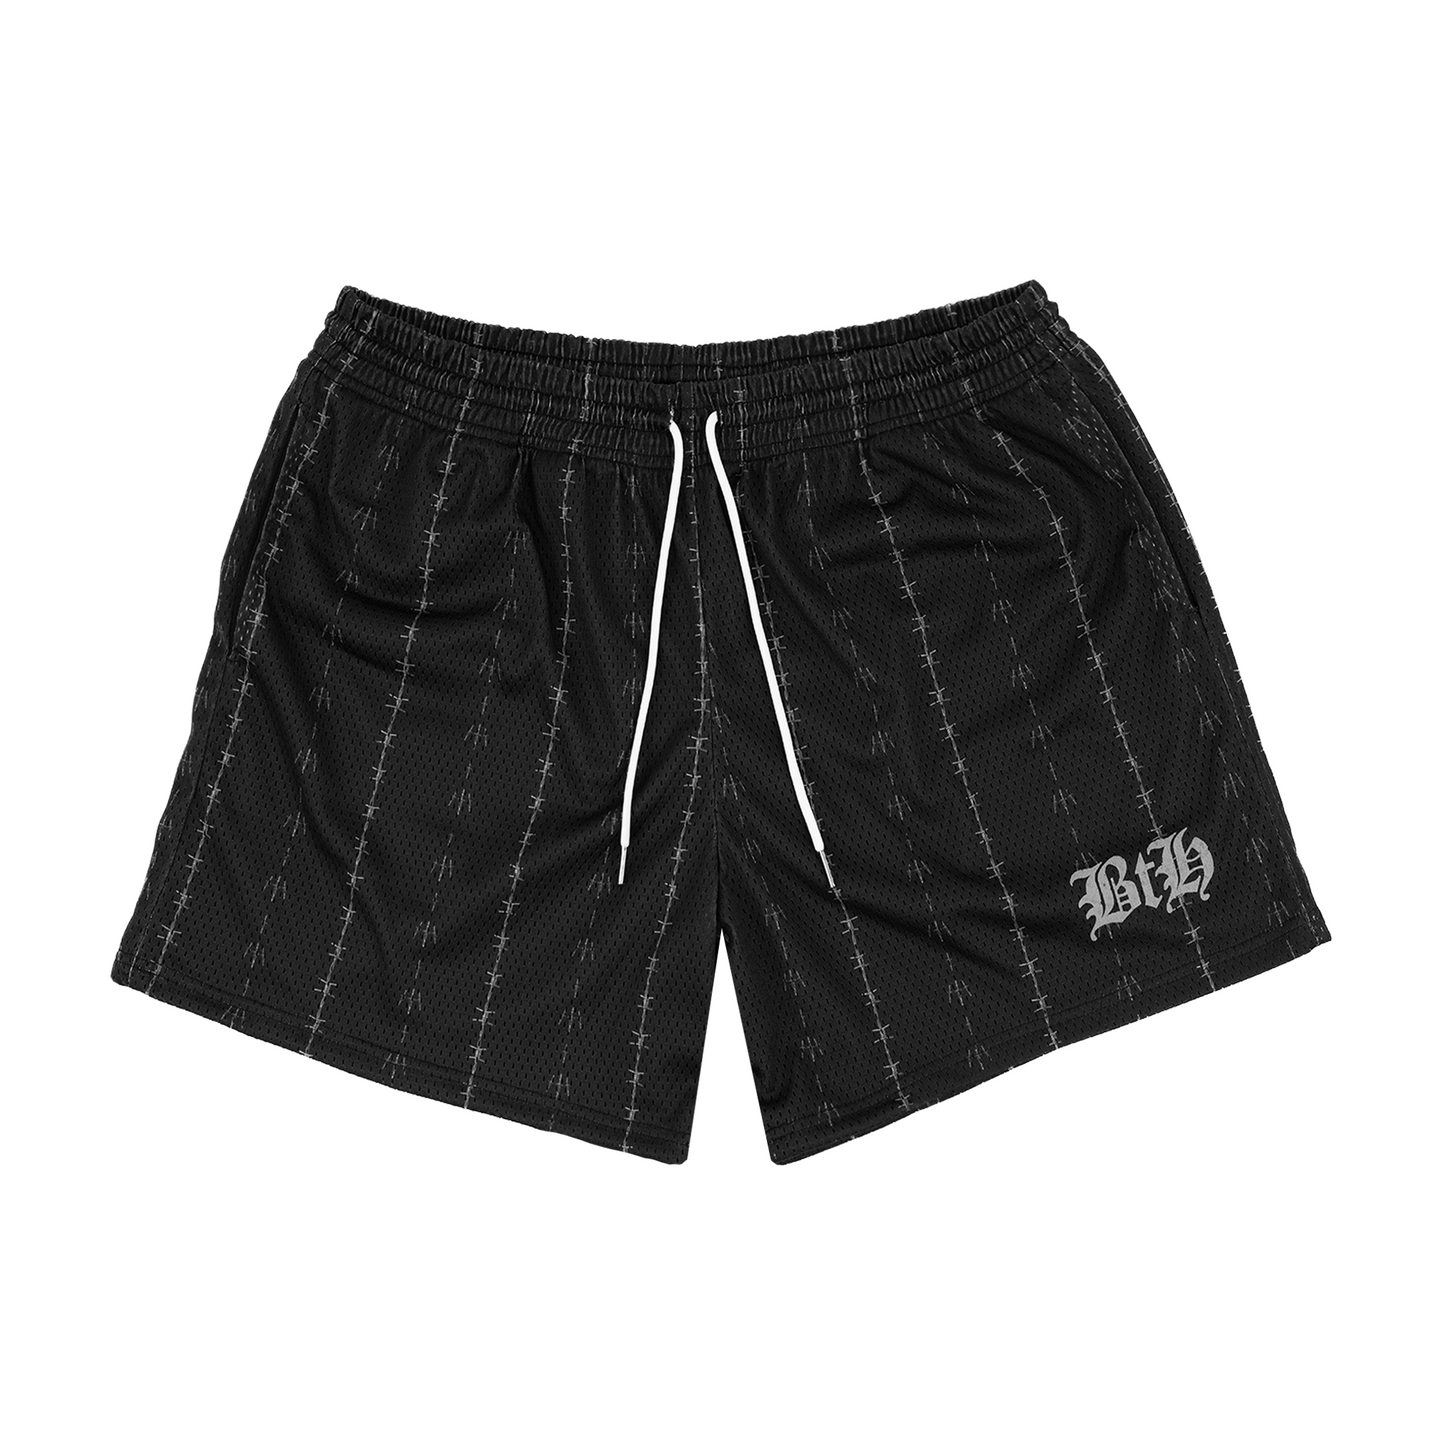 BTH MESH SHORTS – Believe The Hype